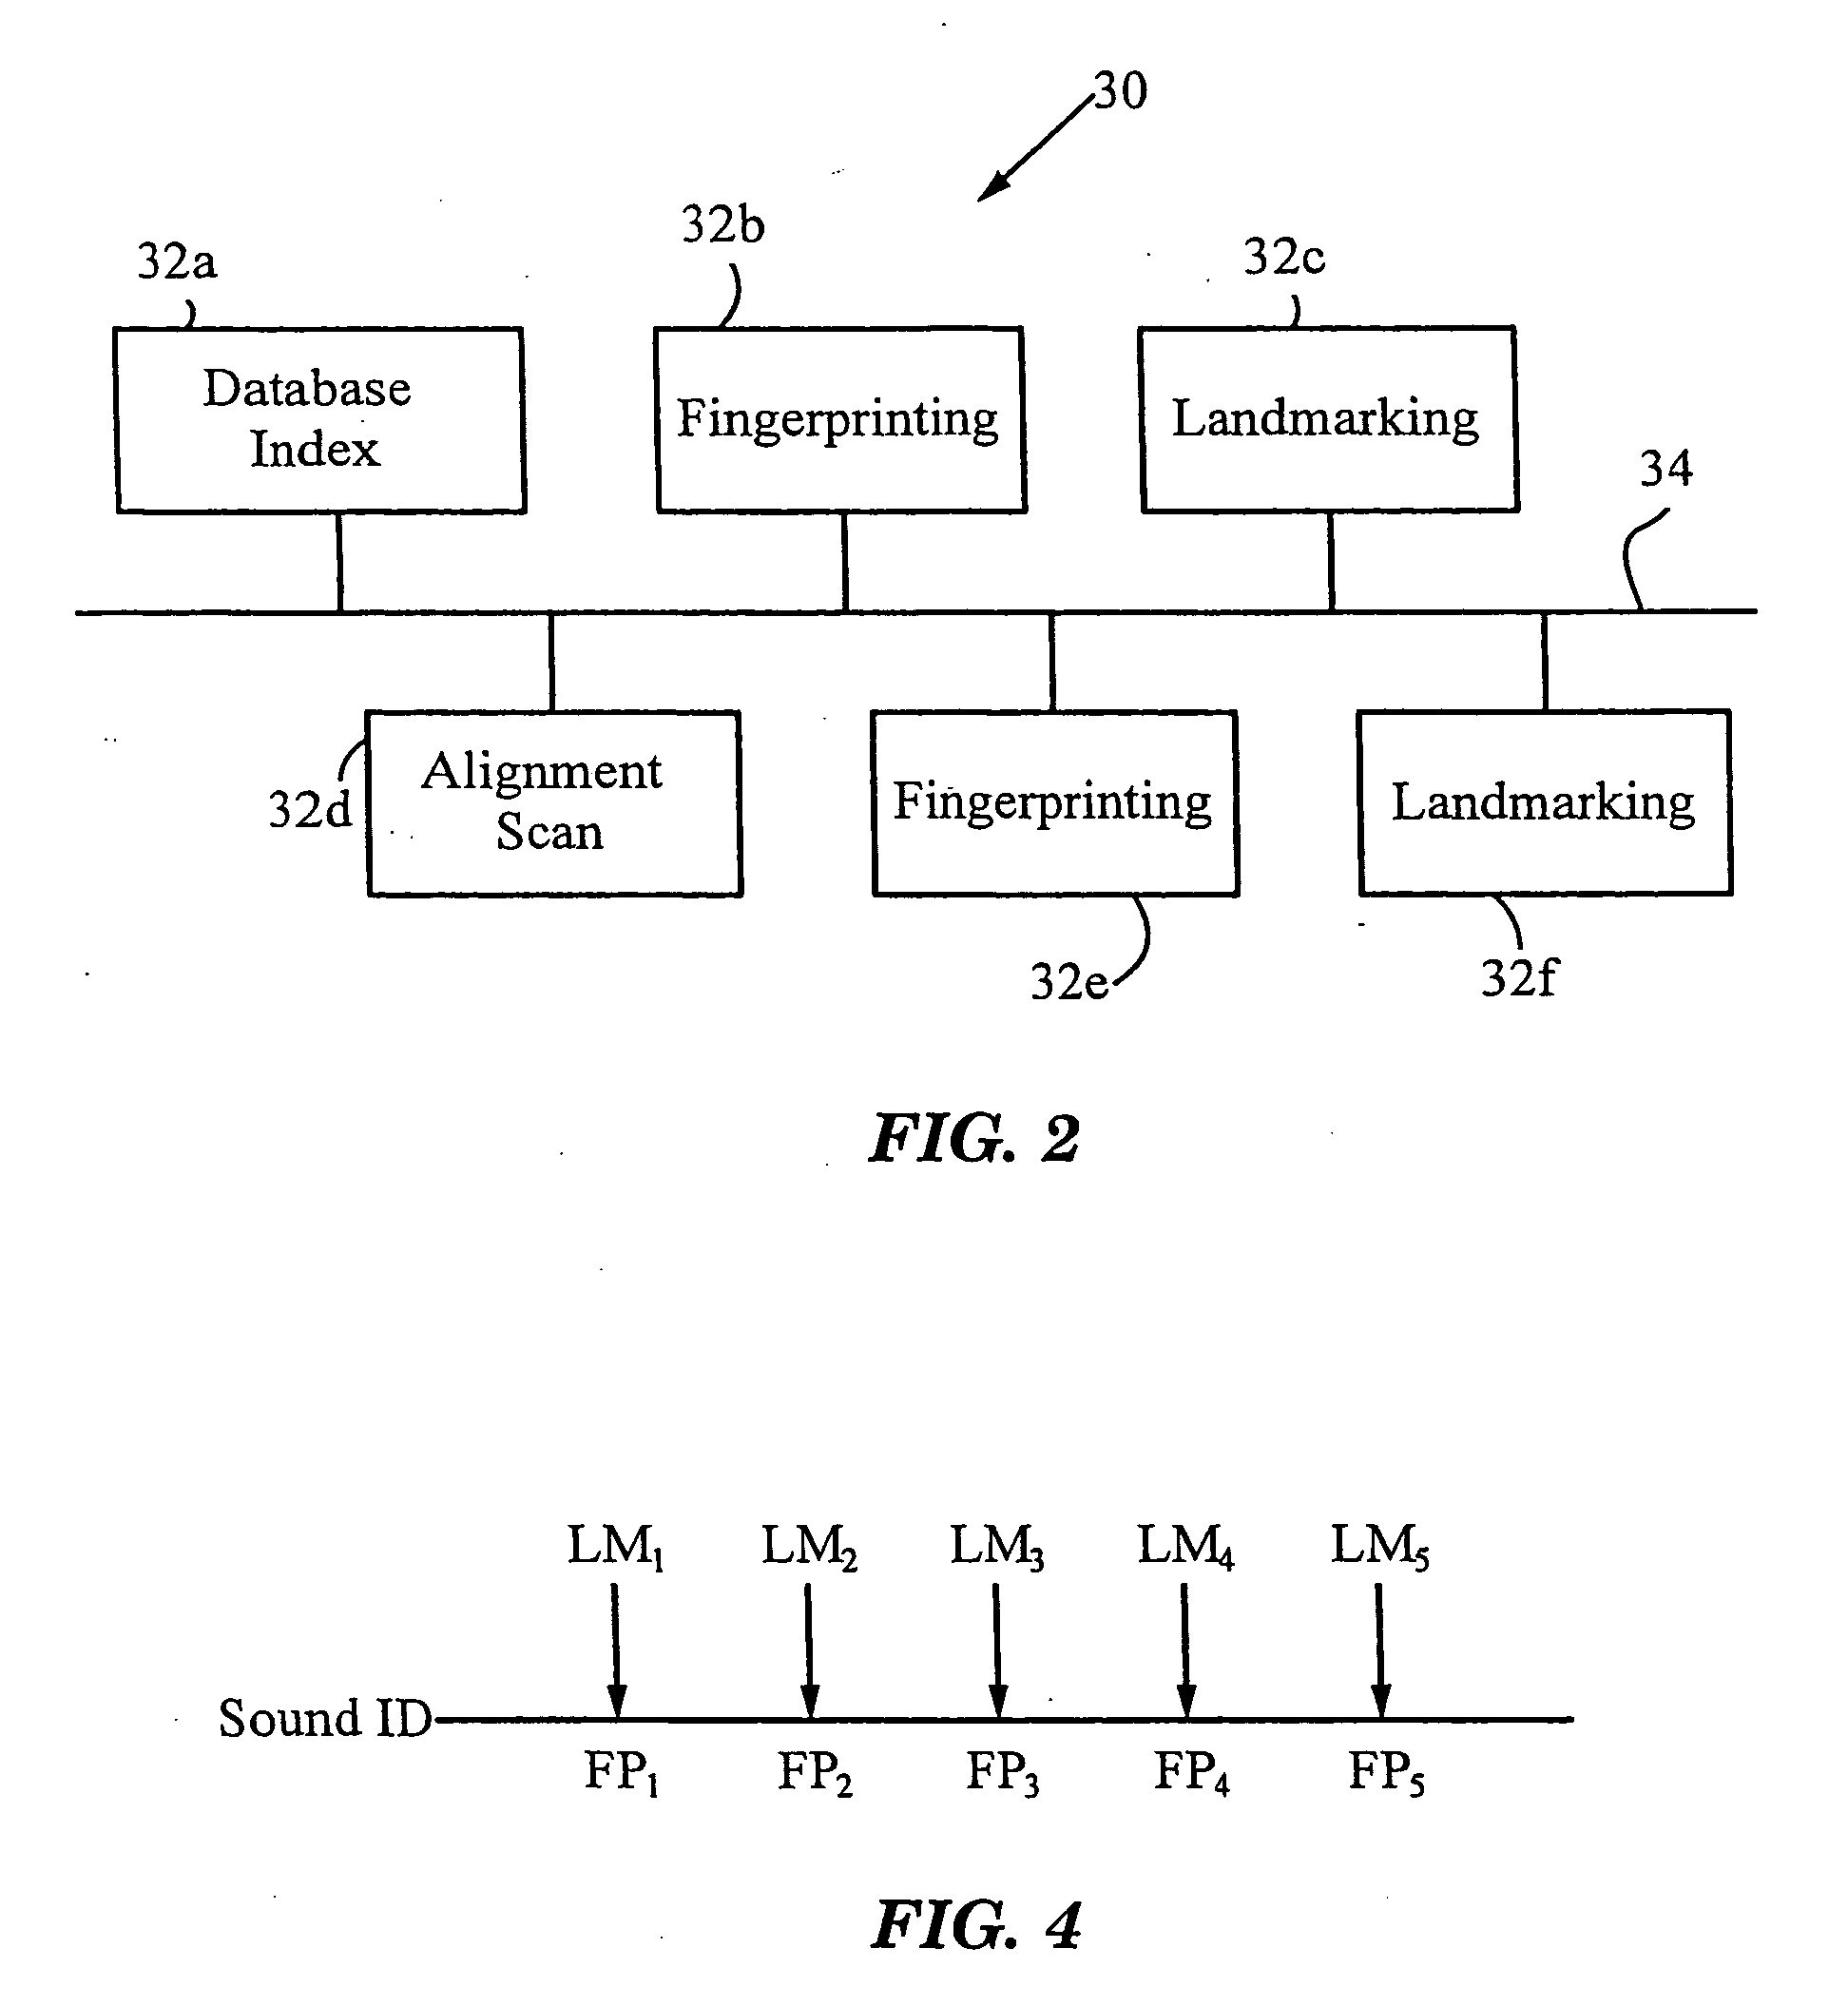 System and methods for recognizing sound and music signals in high noise and distortion